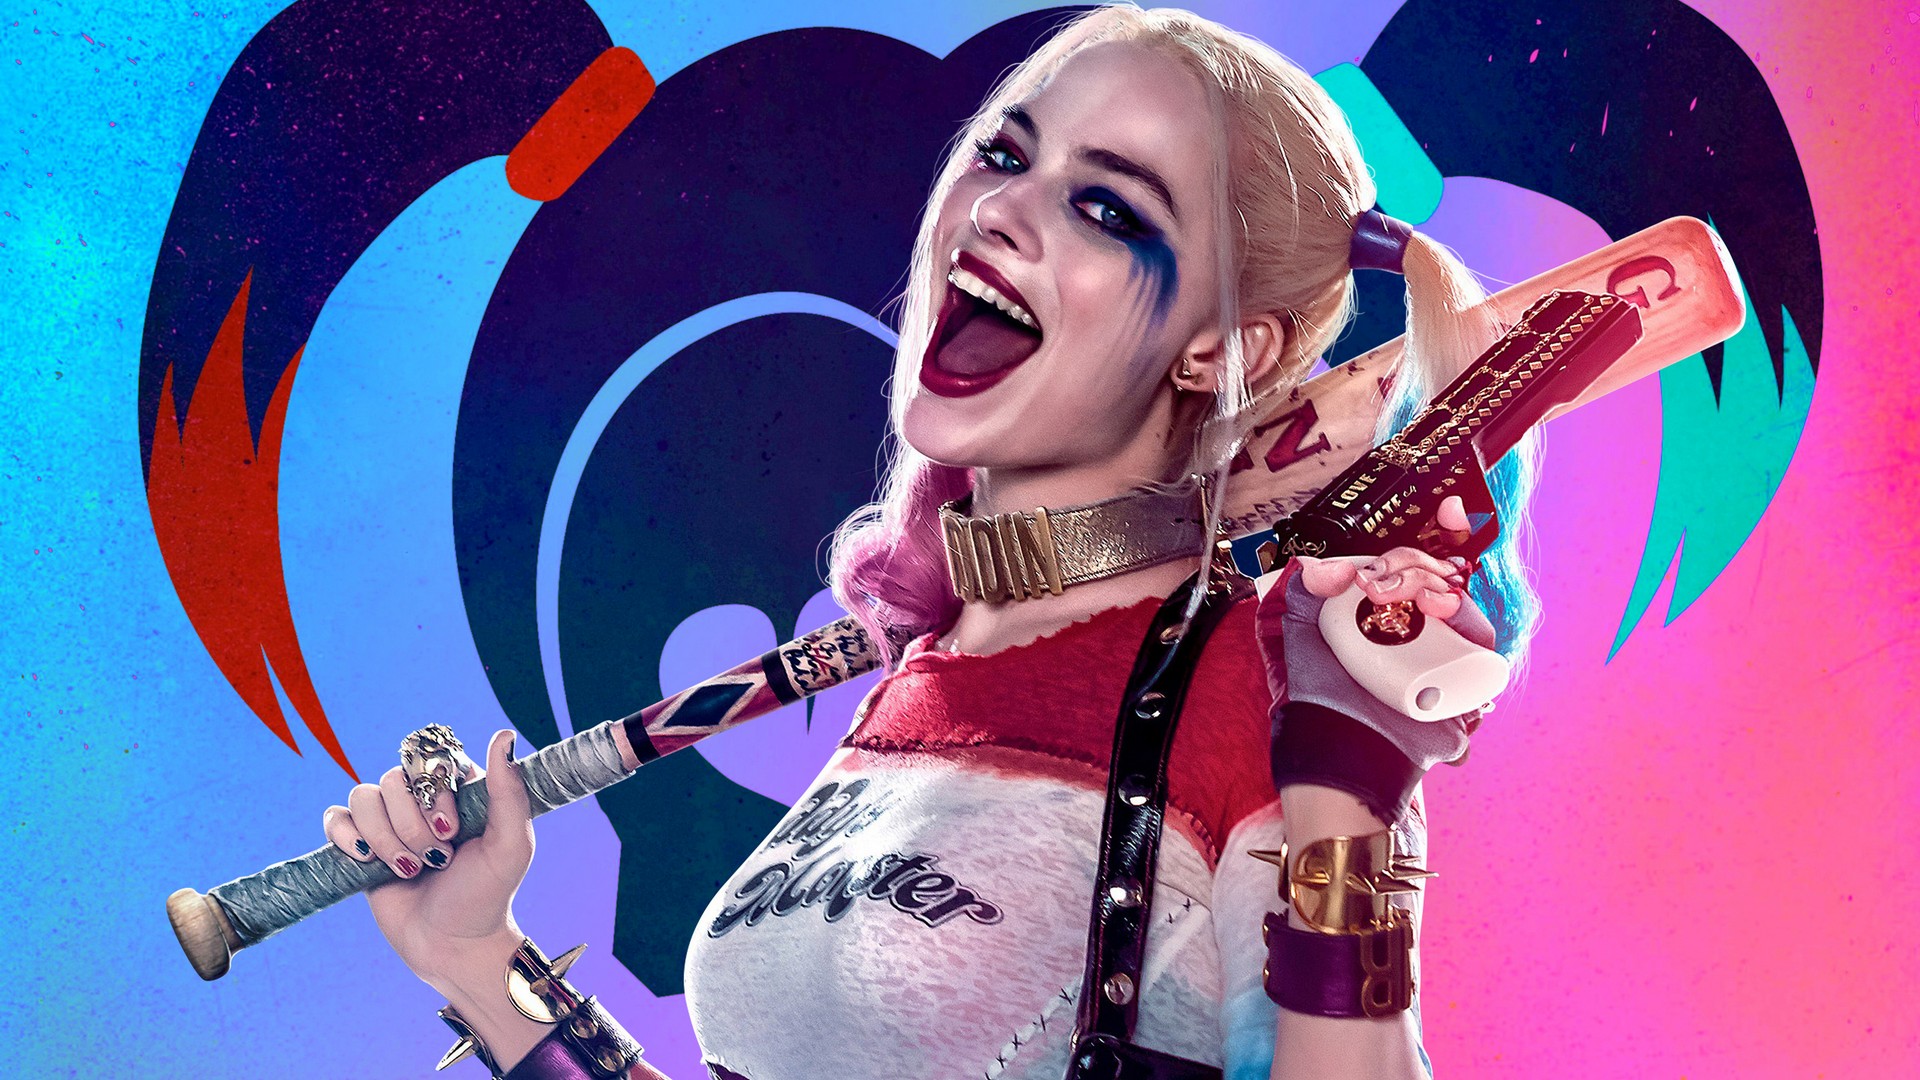 Harley Quinn Wallpaper For Desktop with image resolution 1920x1080 pixel. You can use this wallpaper as background for your desktop Computer Screensavers, Android or iPhone smartphones